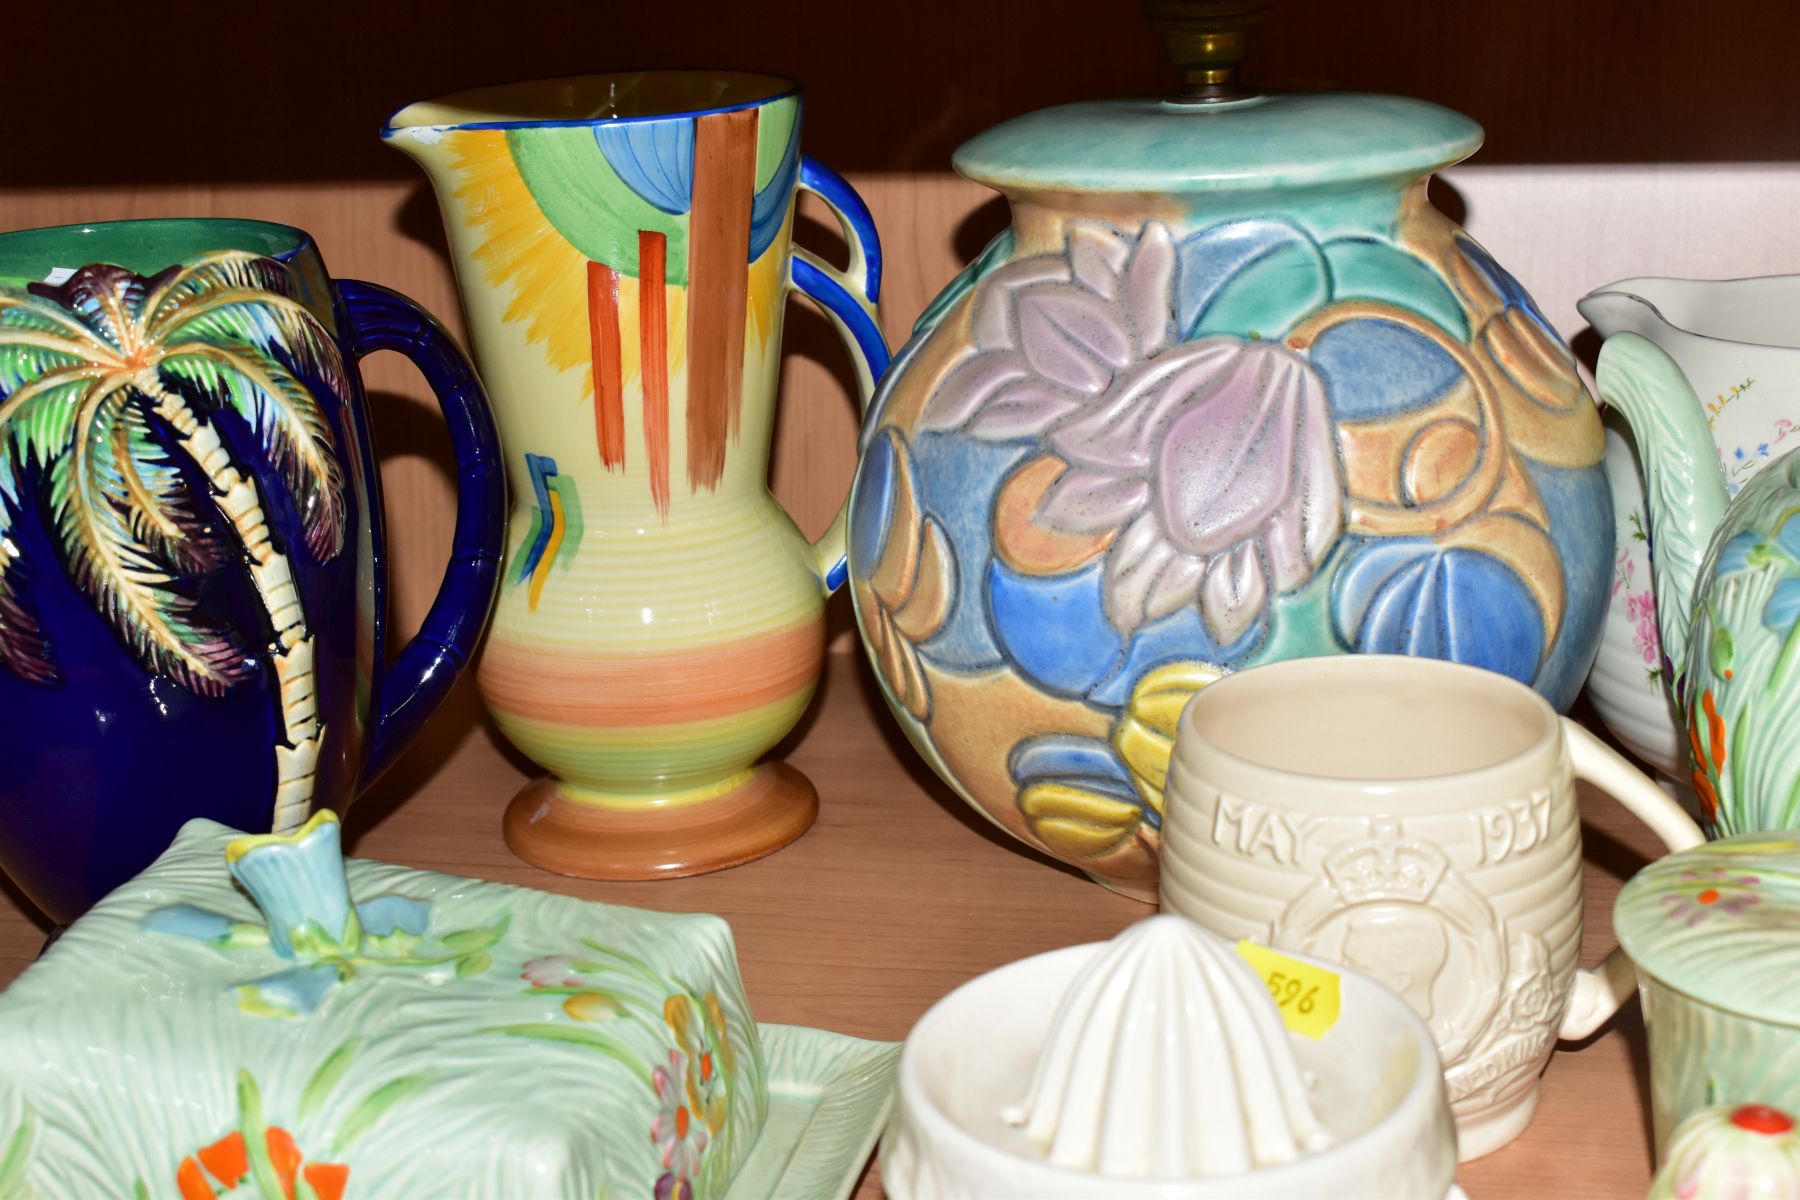 A GROUP OF BESWICK CERAMIC WARES, comprising an Art Deco jug marked Beswick Handcraft (sd), a - Image 5 of 8